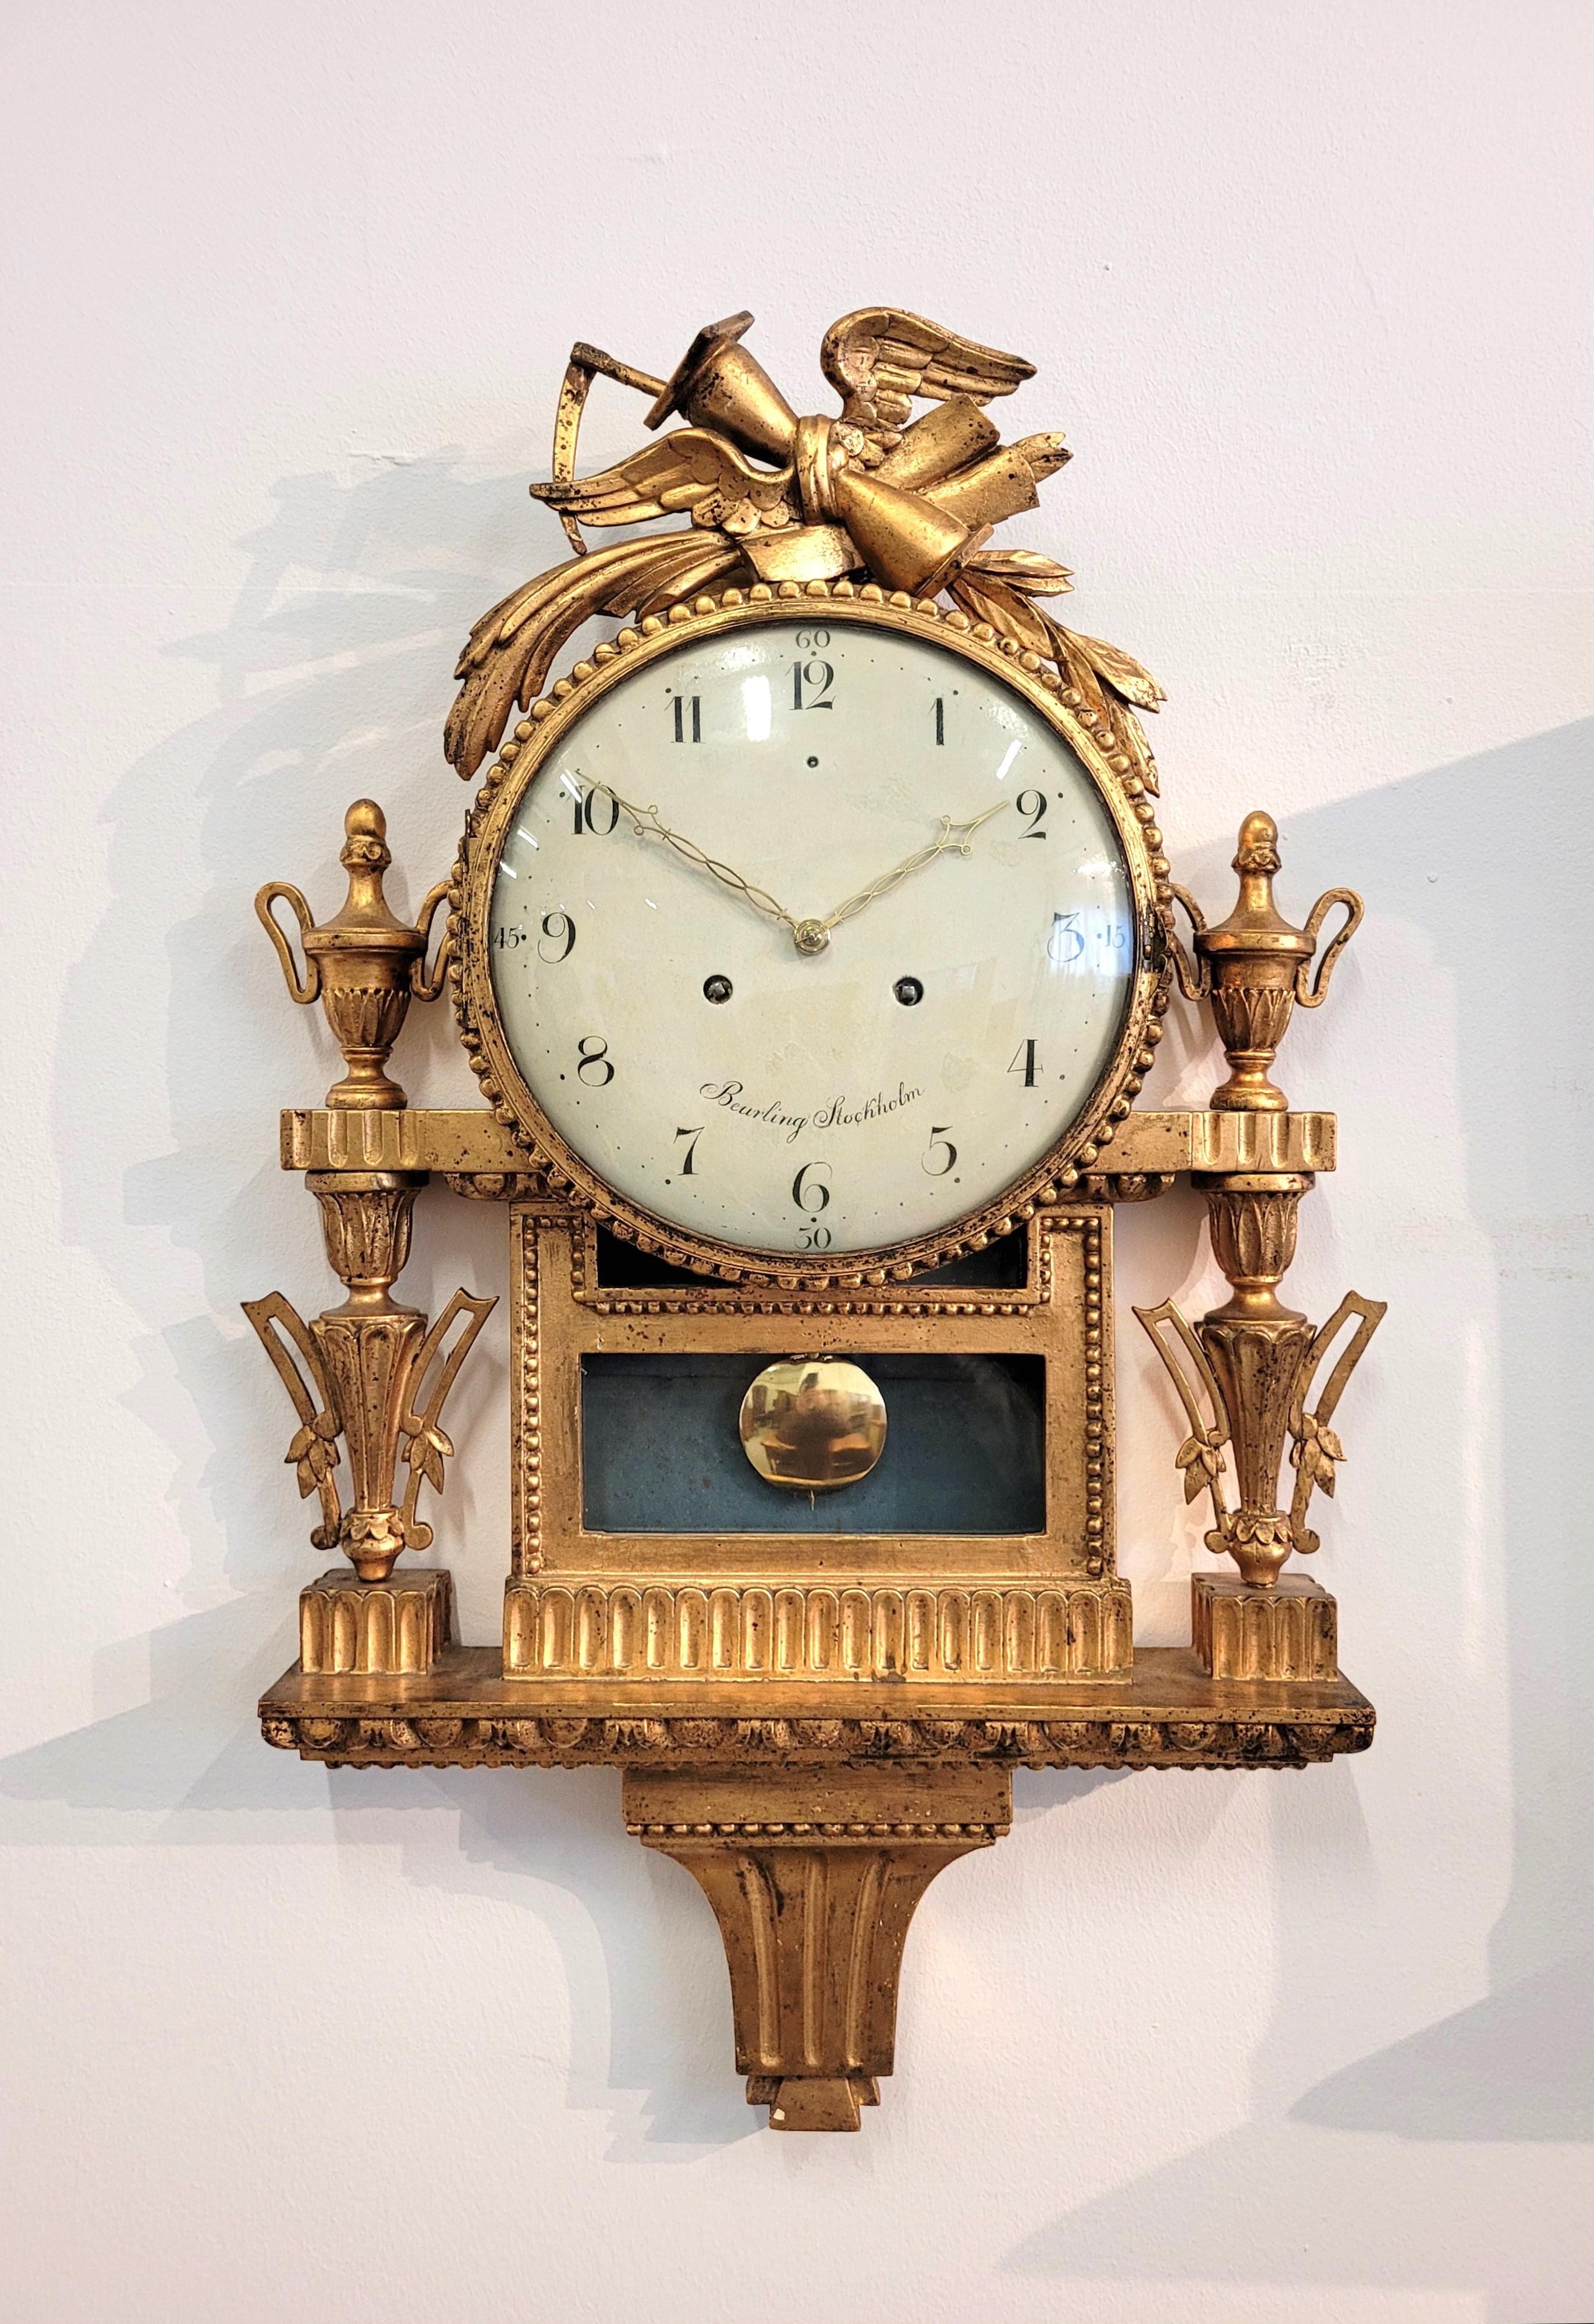 Antique Louis XVI cartel clock

swedish
wood gilded
around 1800

Dimensions: H x W x D: 79 x 50 x 12 cm

Description
Antique wall clock, so called Cartel clock, made of carved and gilded wood.
The clock is from the period of Swedish